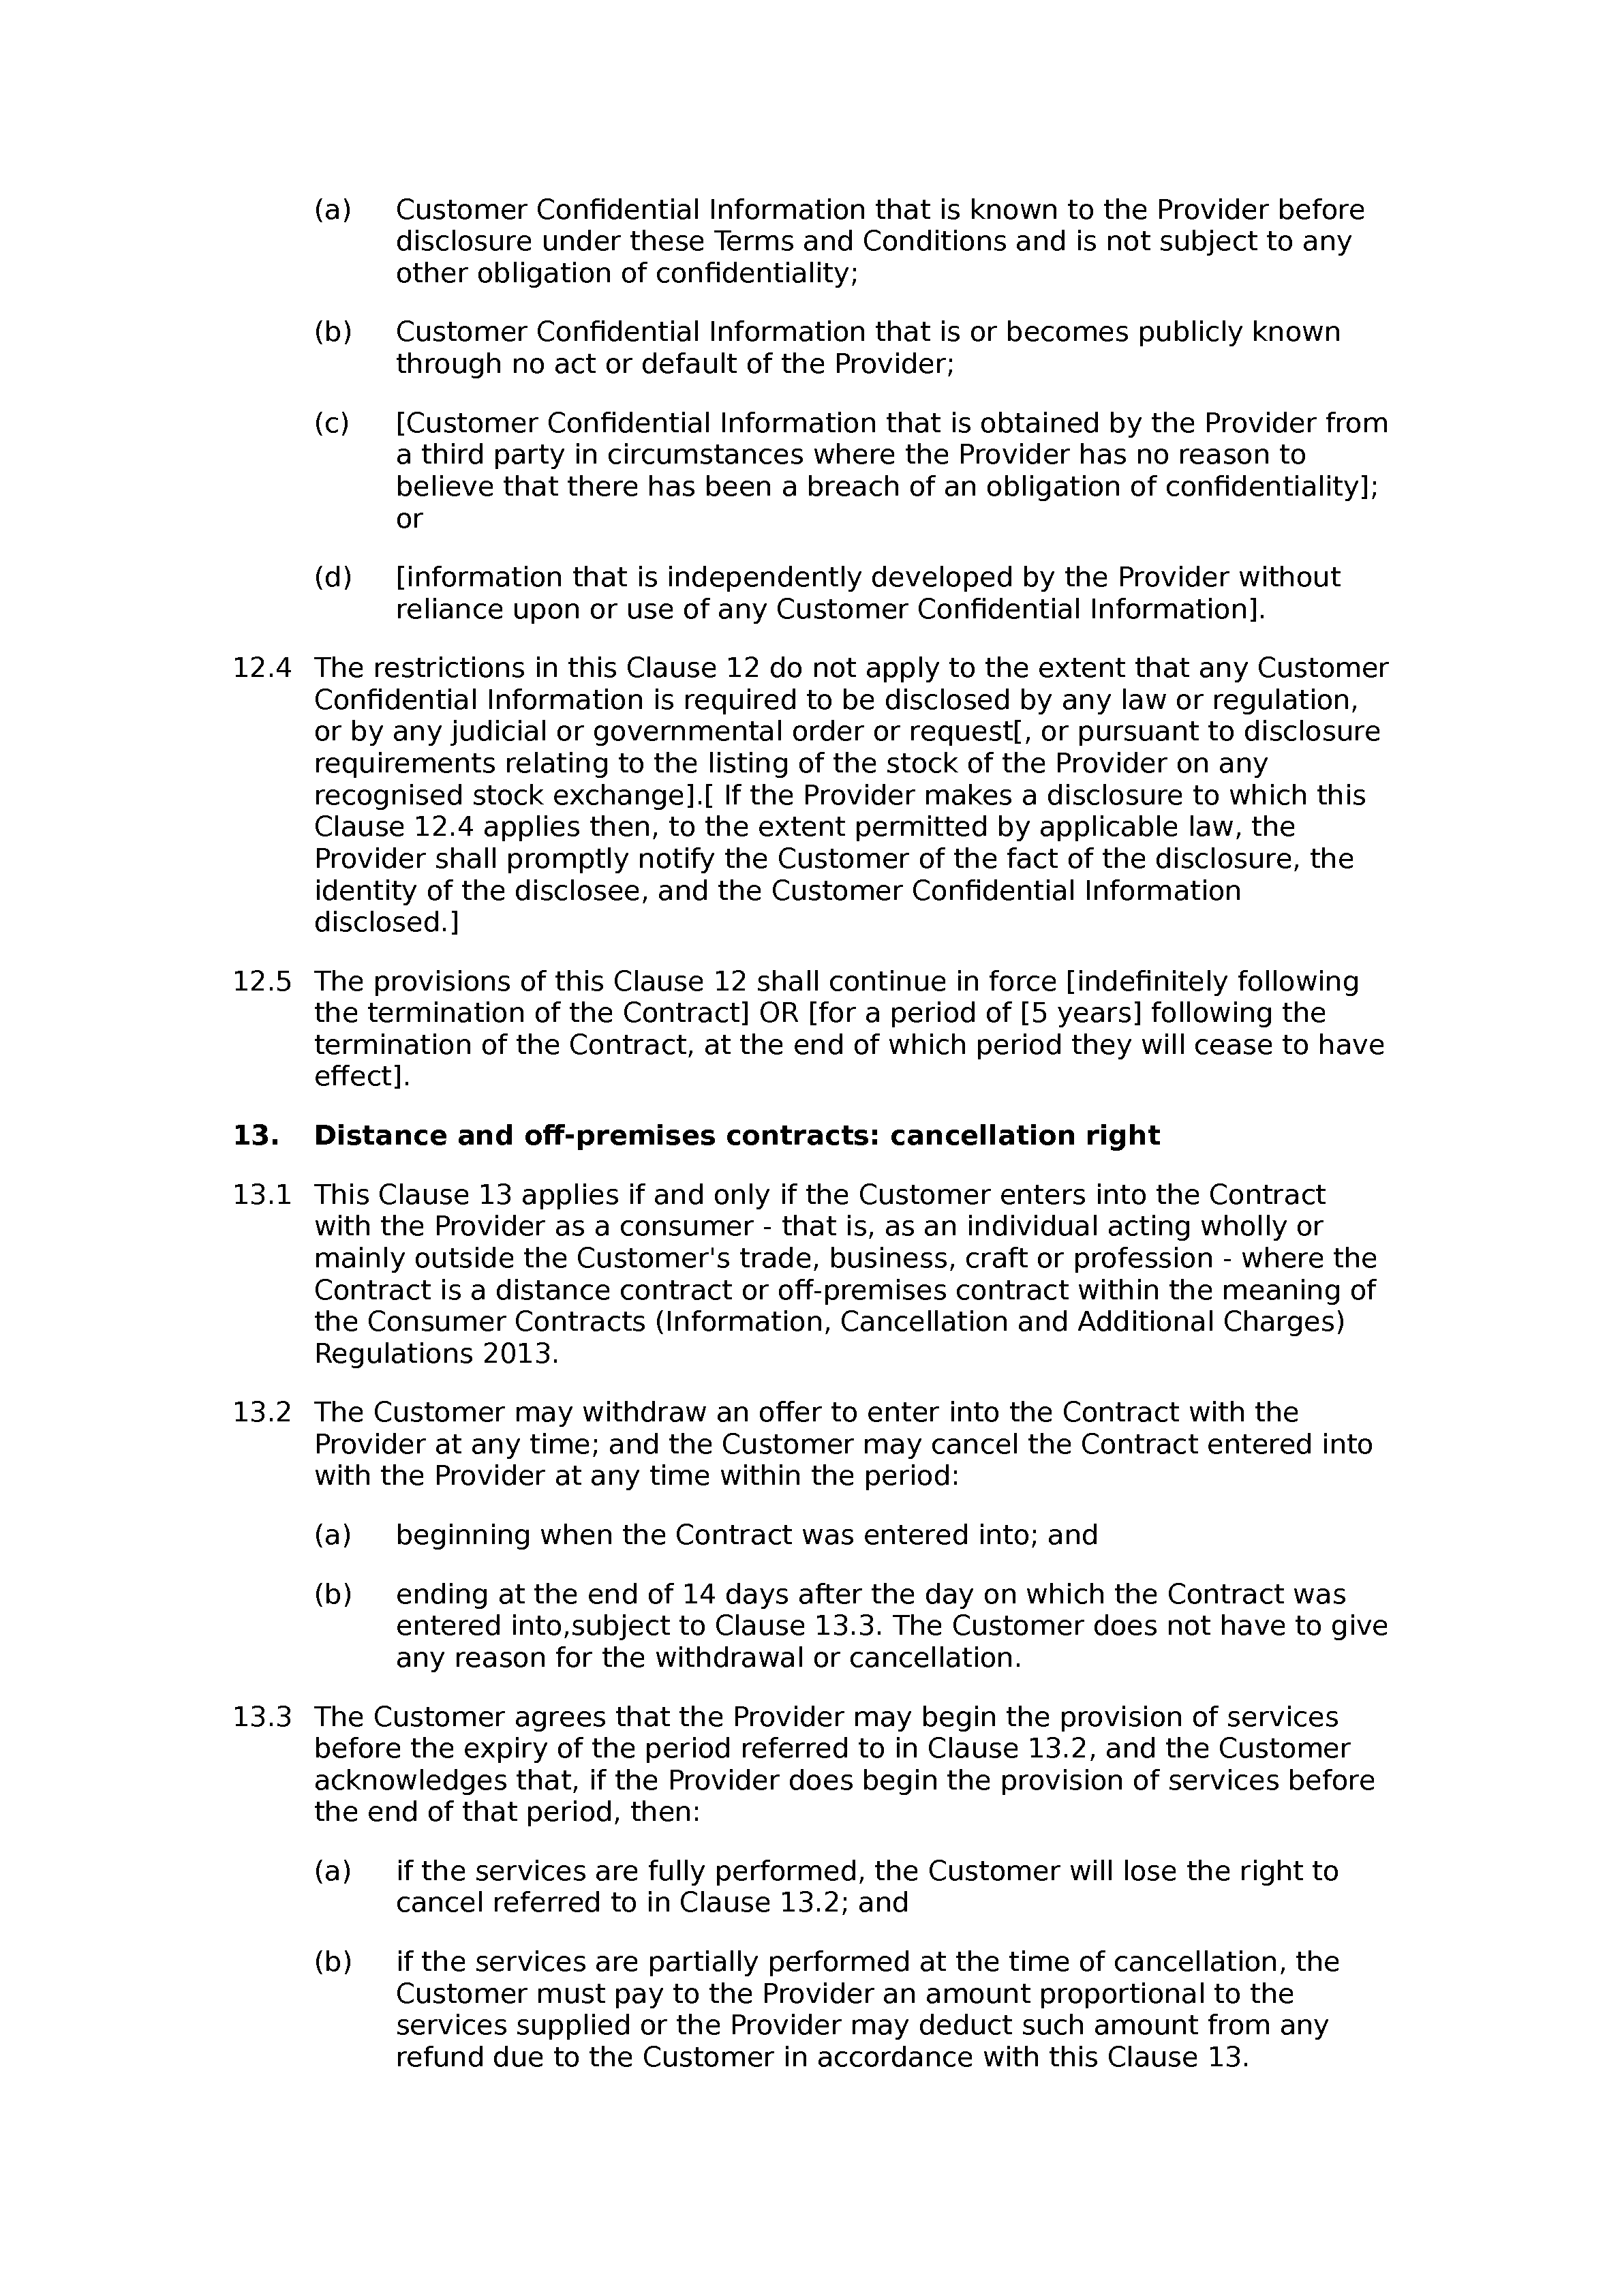 Window cleaning terms and conditions document preview